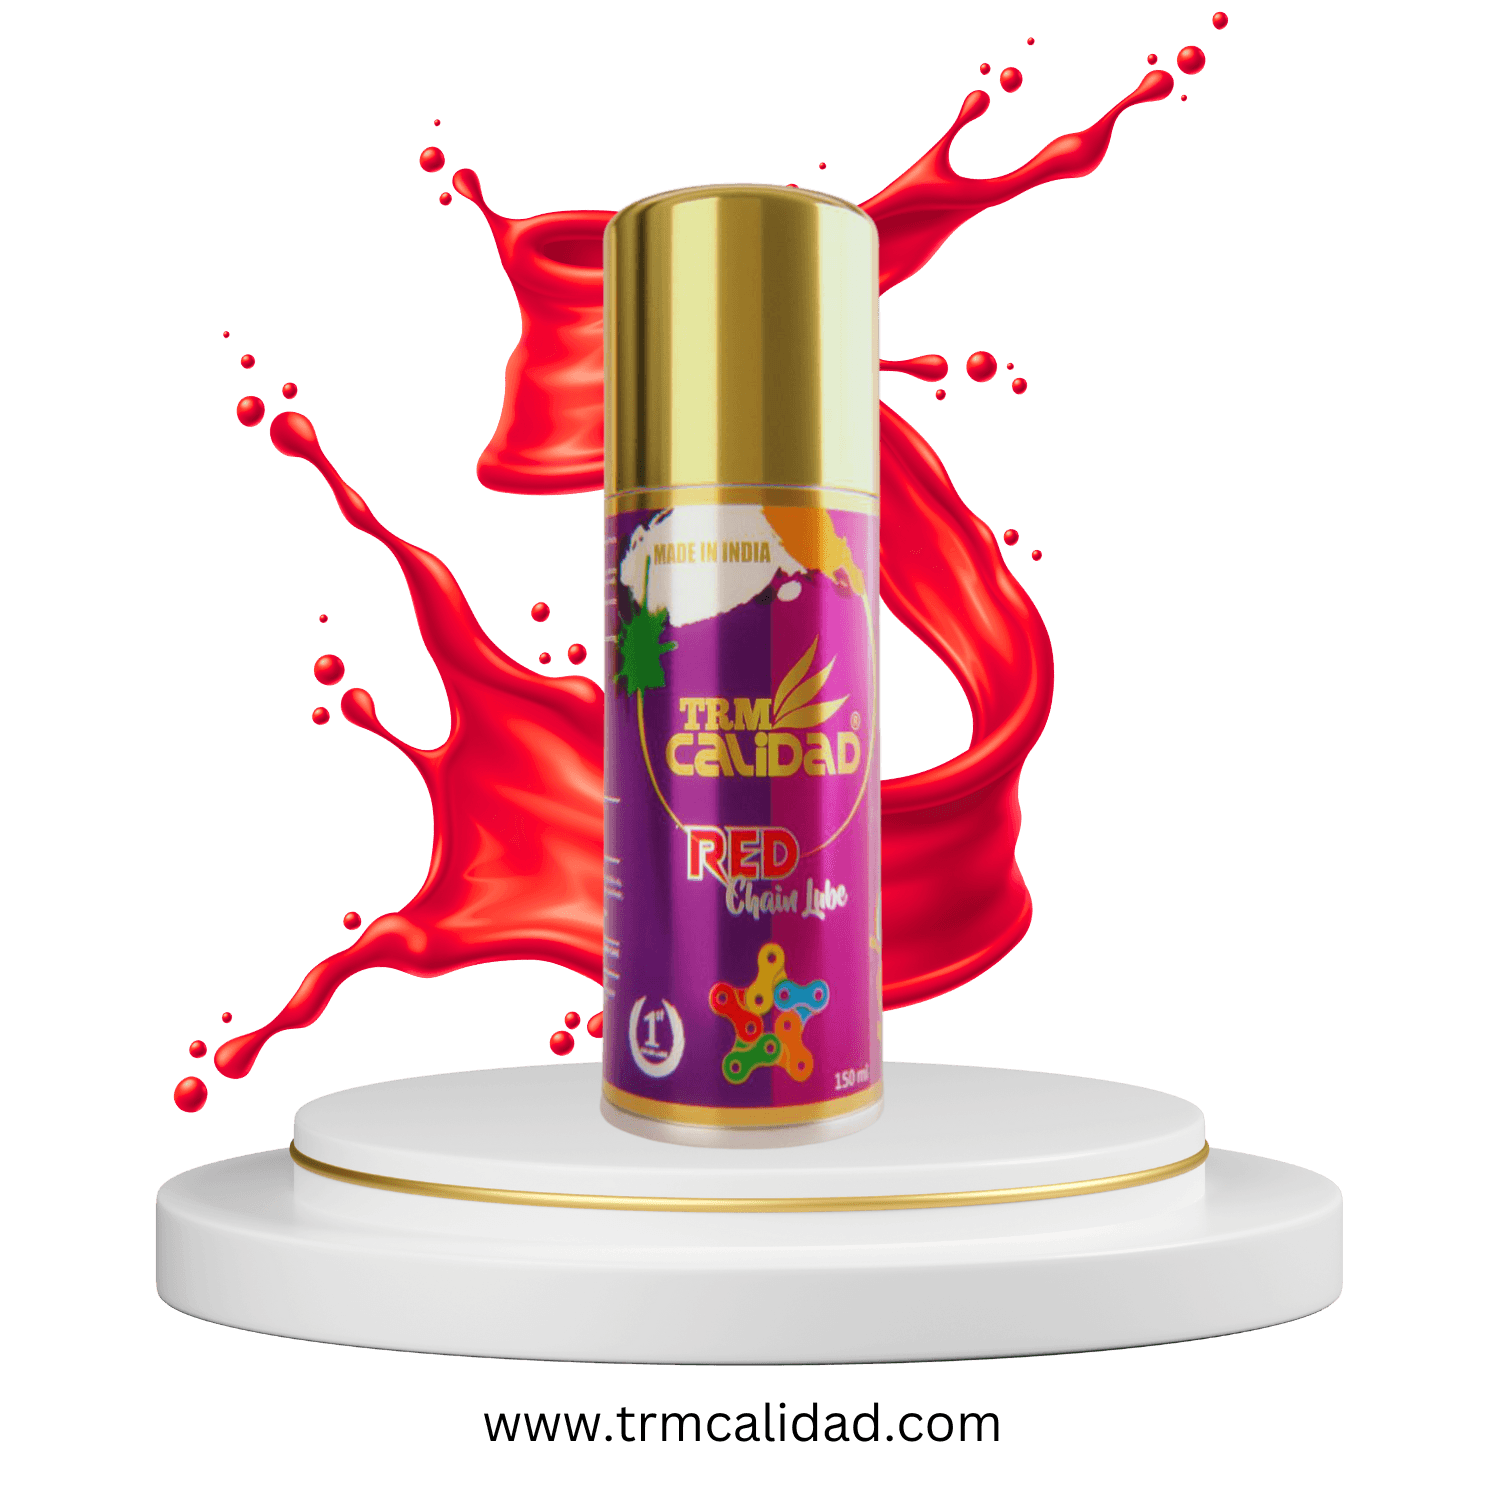 Premium Synthetic Colour Chain lube 150ML - Trmcalidad India